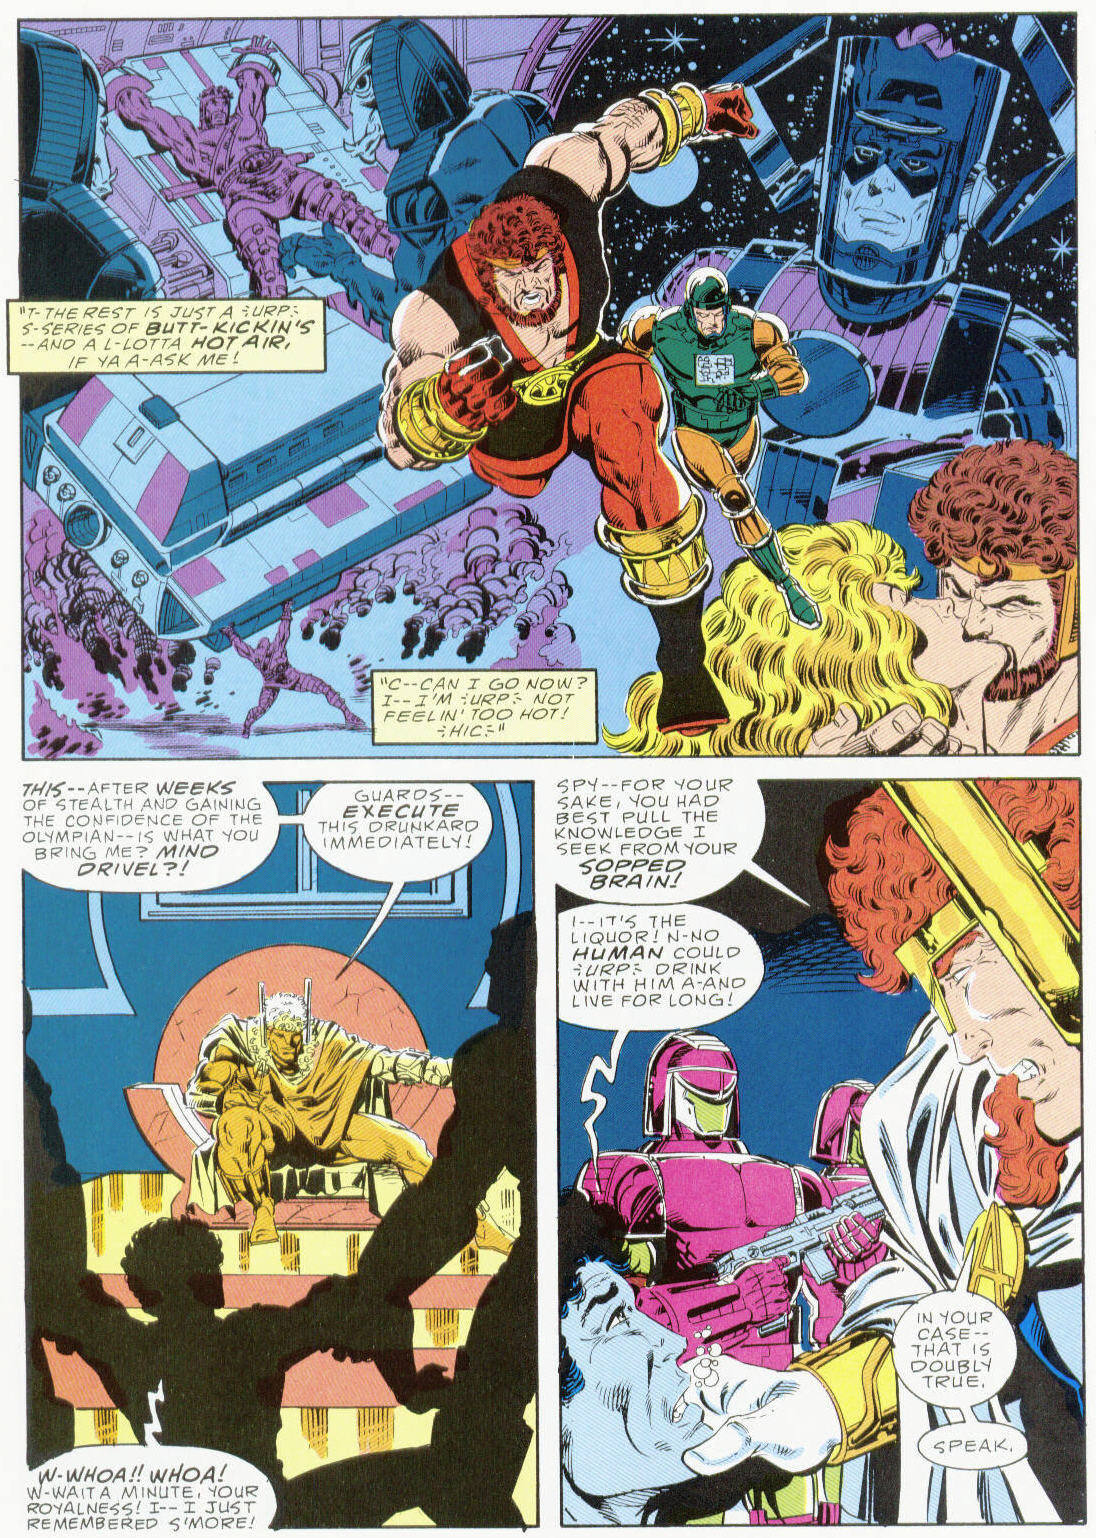 Marvel Graphic Novel issue 37 - Hercules Prince of Power - Full Circle - Page 12